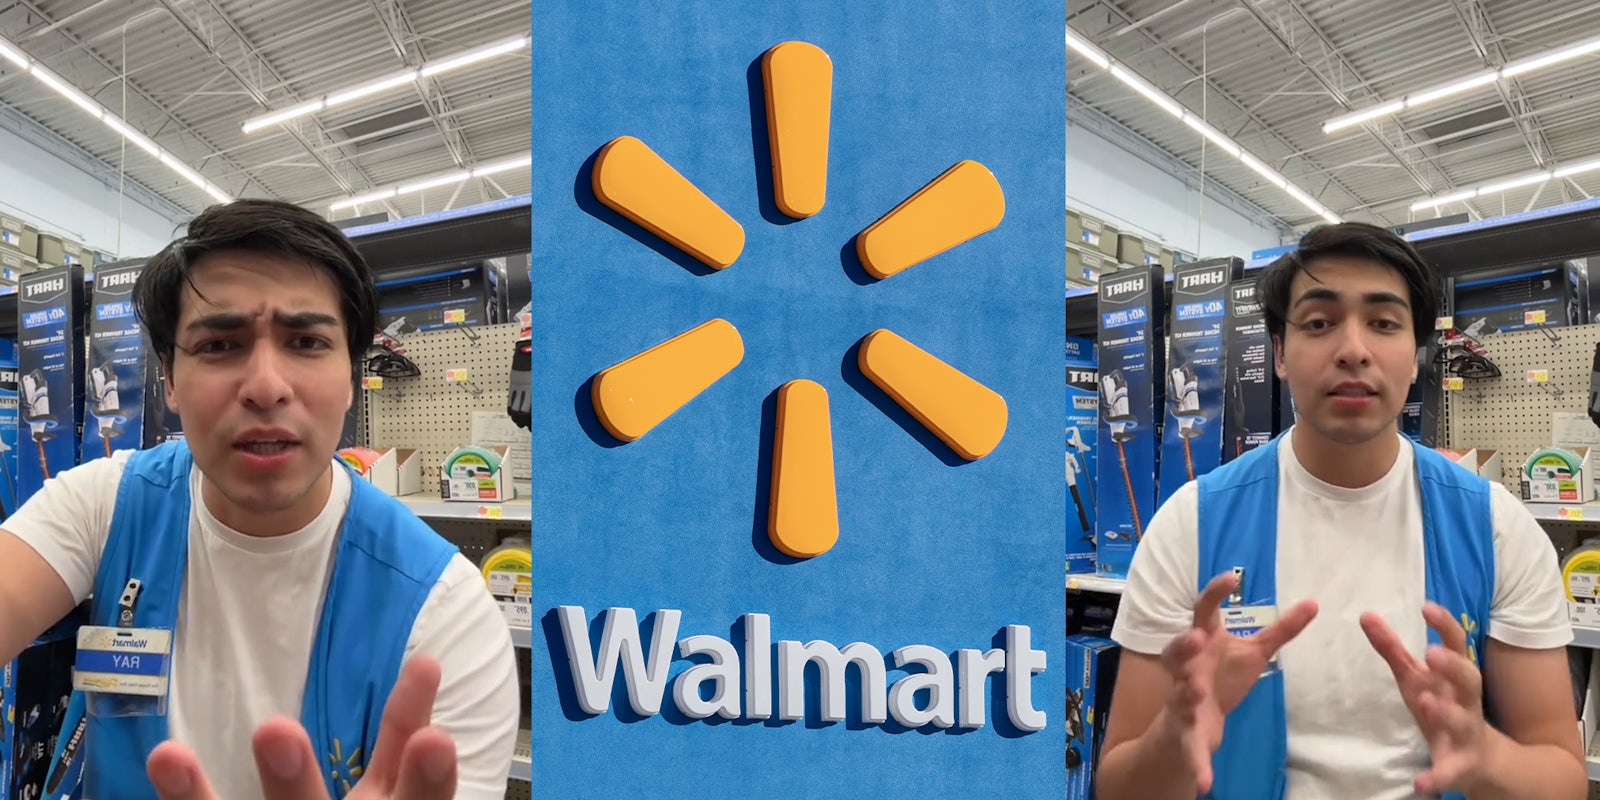 Walmart worker calls out last-minute shoppers who come in 30 minutes before close